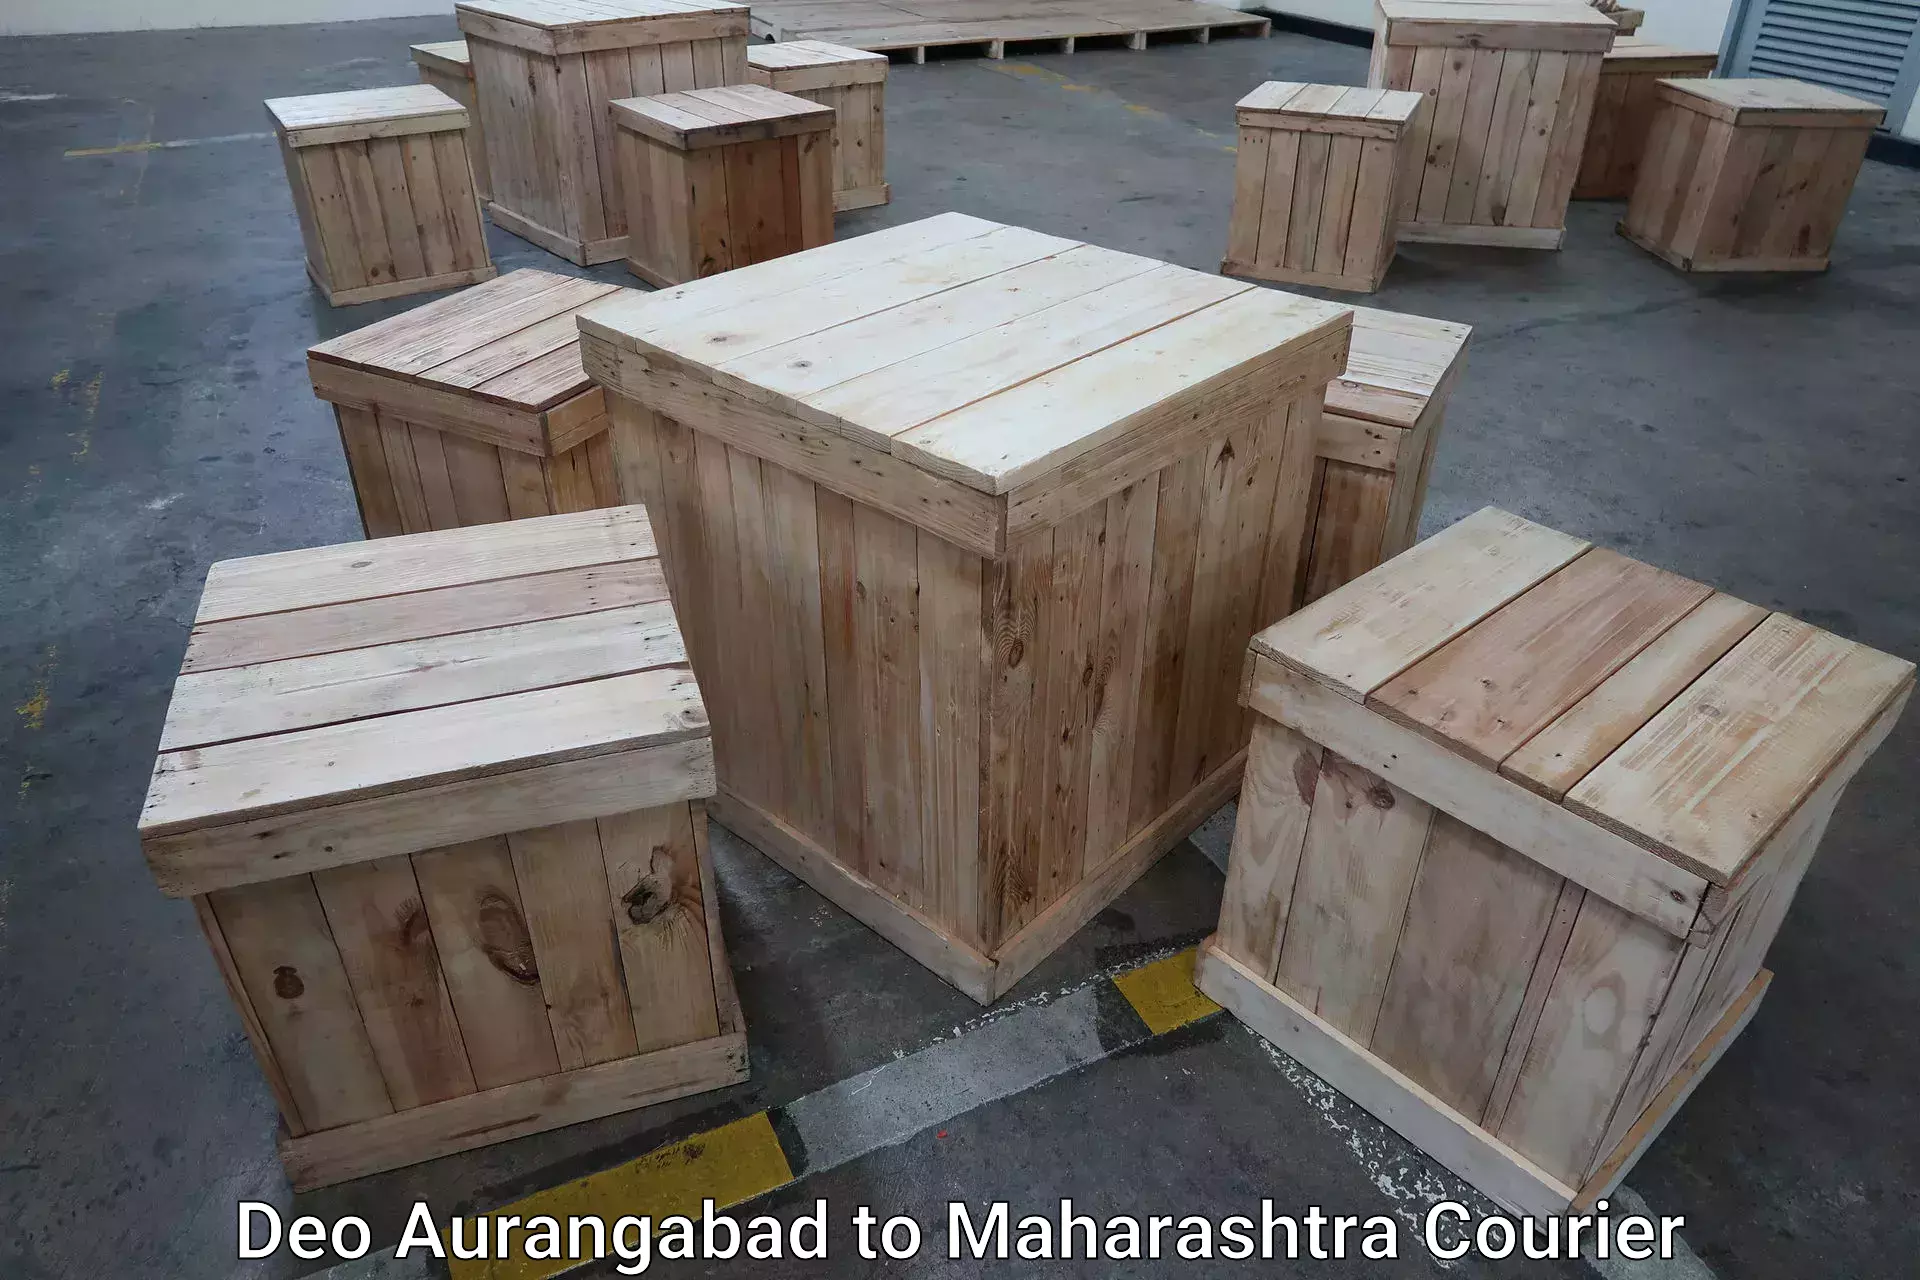 Baggage shipping schedule in Deo Aurangabad to Maharashtra